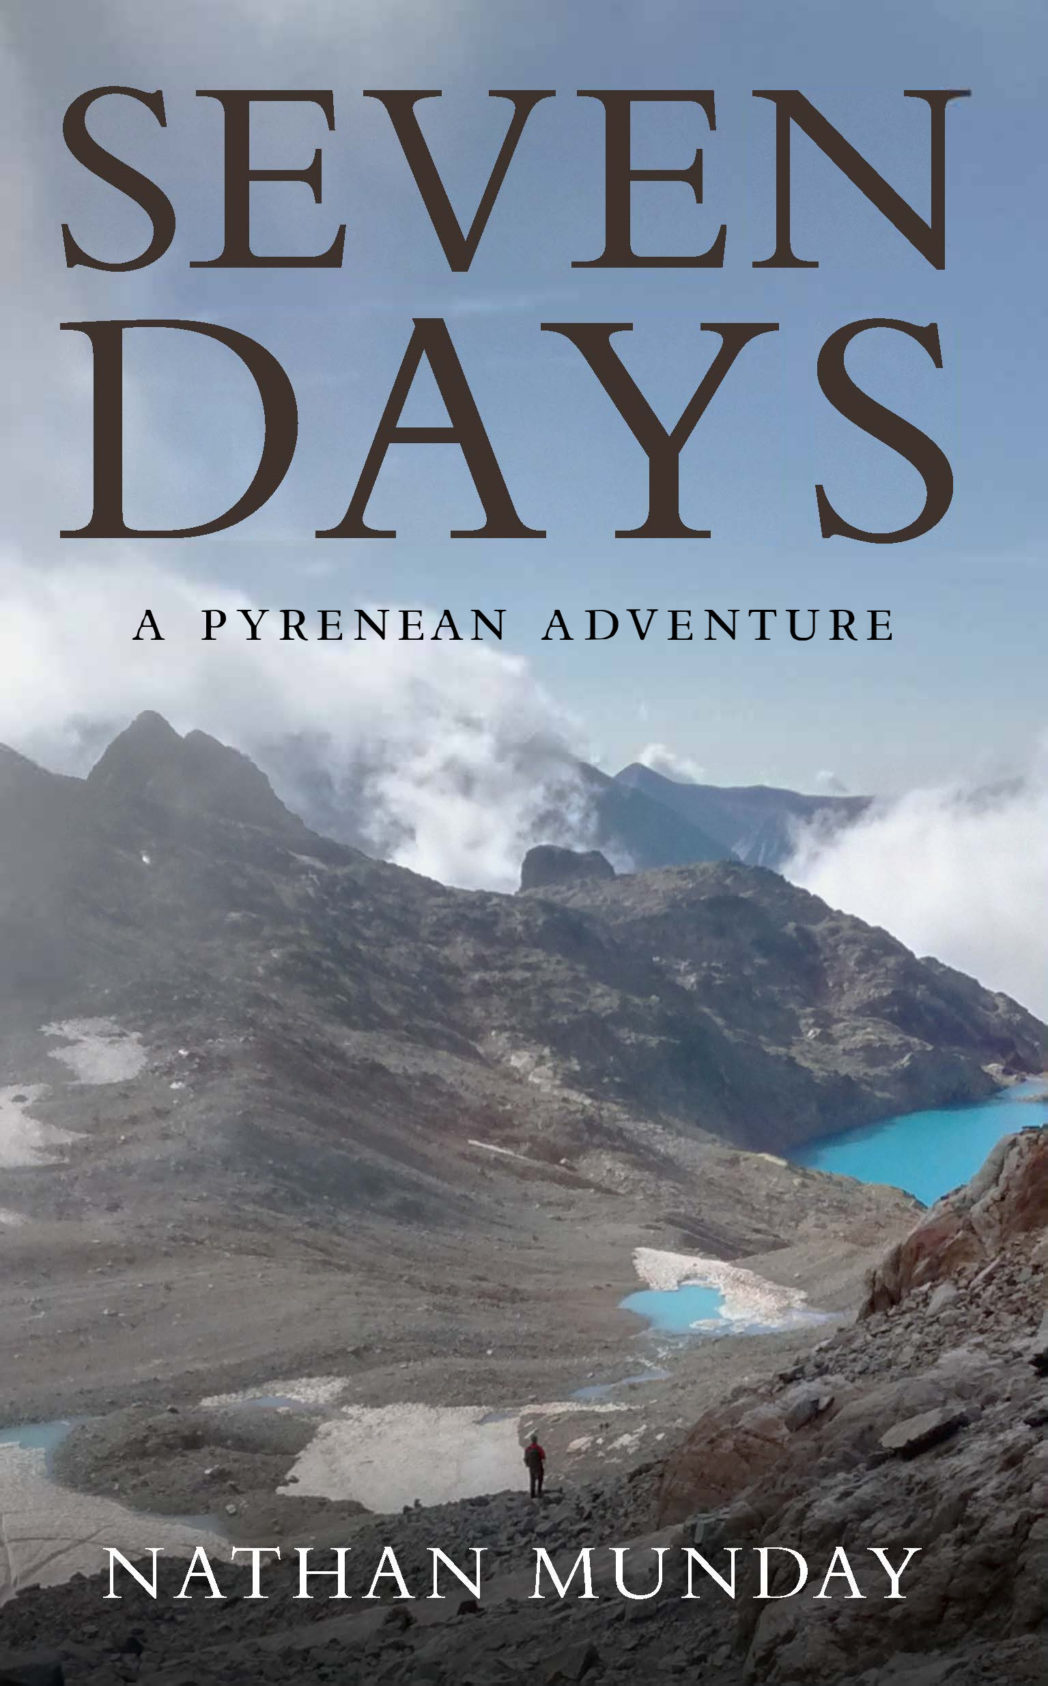 Seven Days by Eve Ainsworth